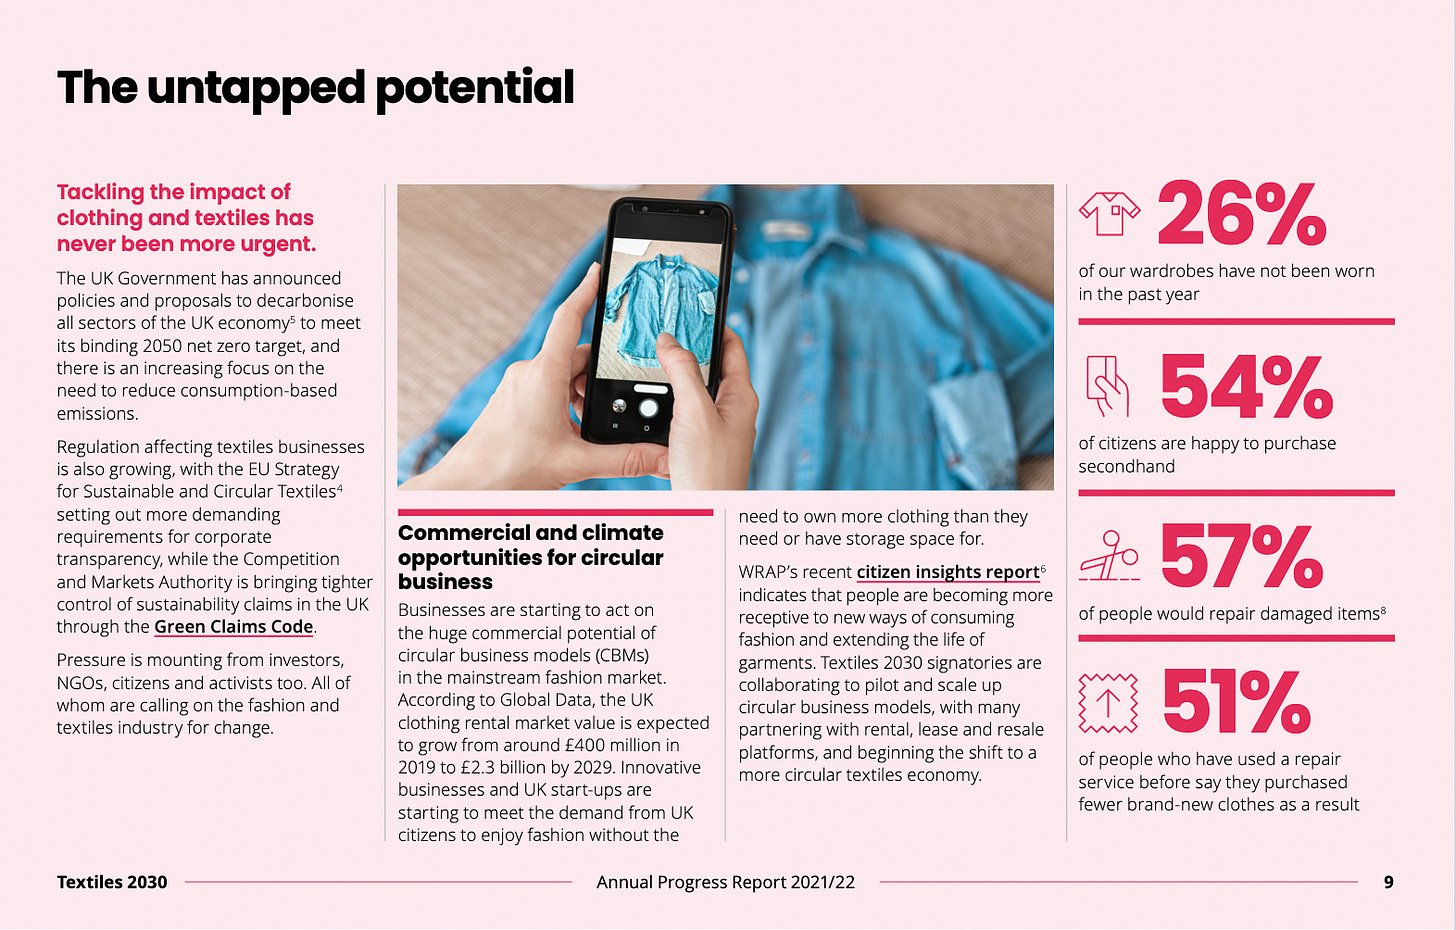 Why is Textiles 2030 needed? Annual Progress Report 2021/22 page 9 showing statistics around textile waste, including '26% of our wardrobes have not been worn in the past year', '54% of citizens are happy to purchase second hand', '57% of people would repair damaged items', and '51% of people who have used a repair service before say they purchased fewer brand-new clothes as a result'.